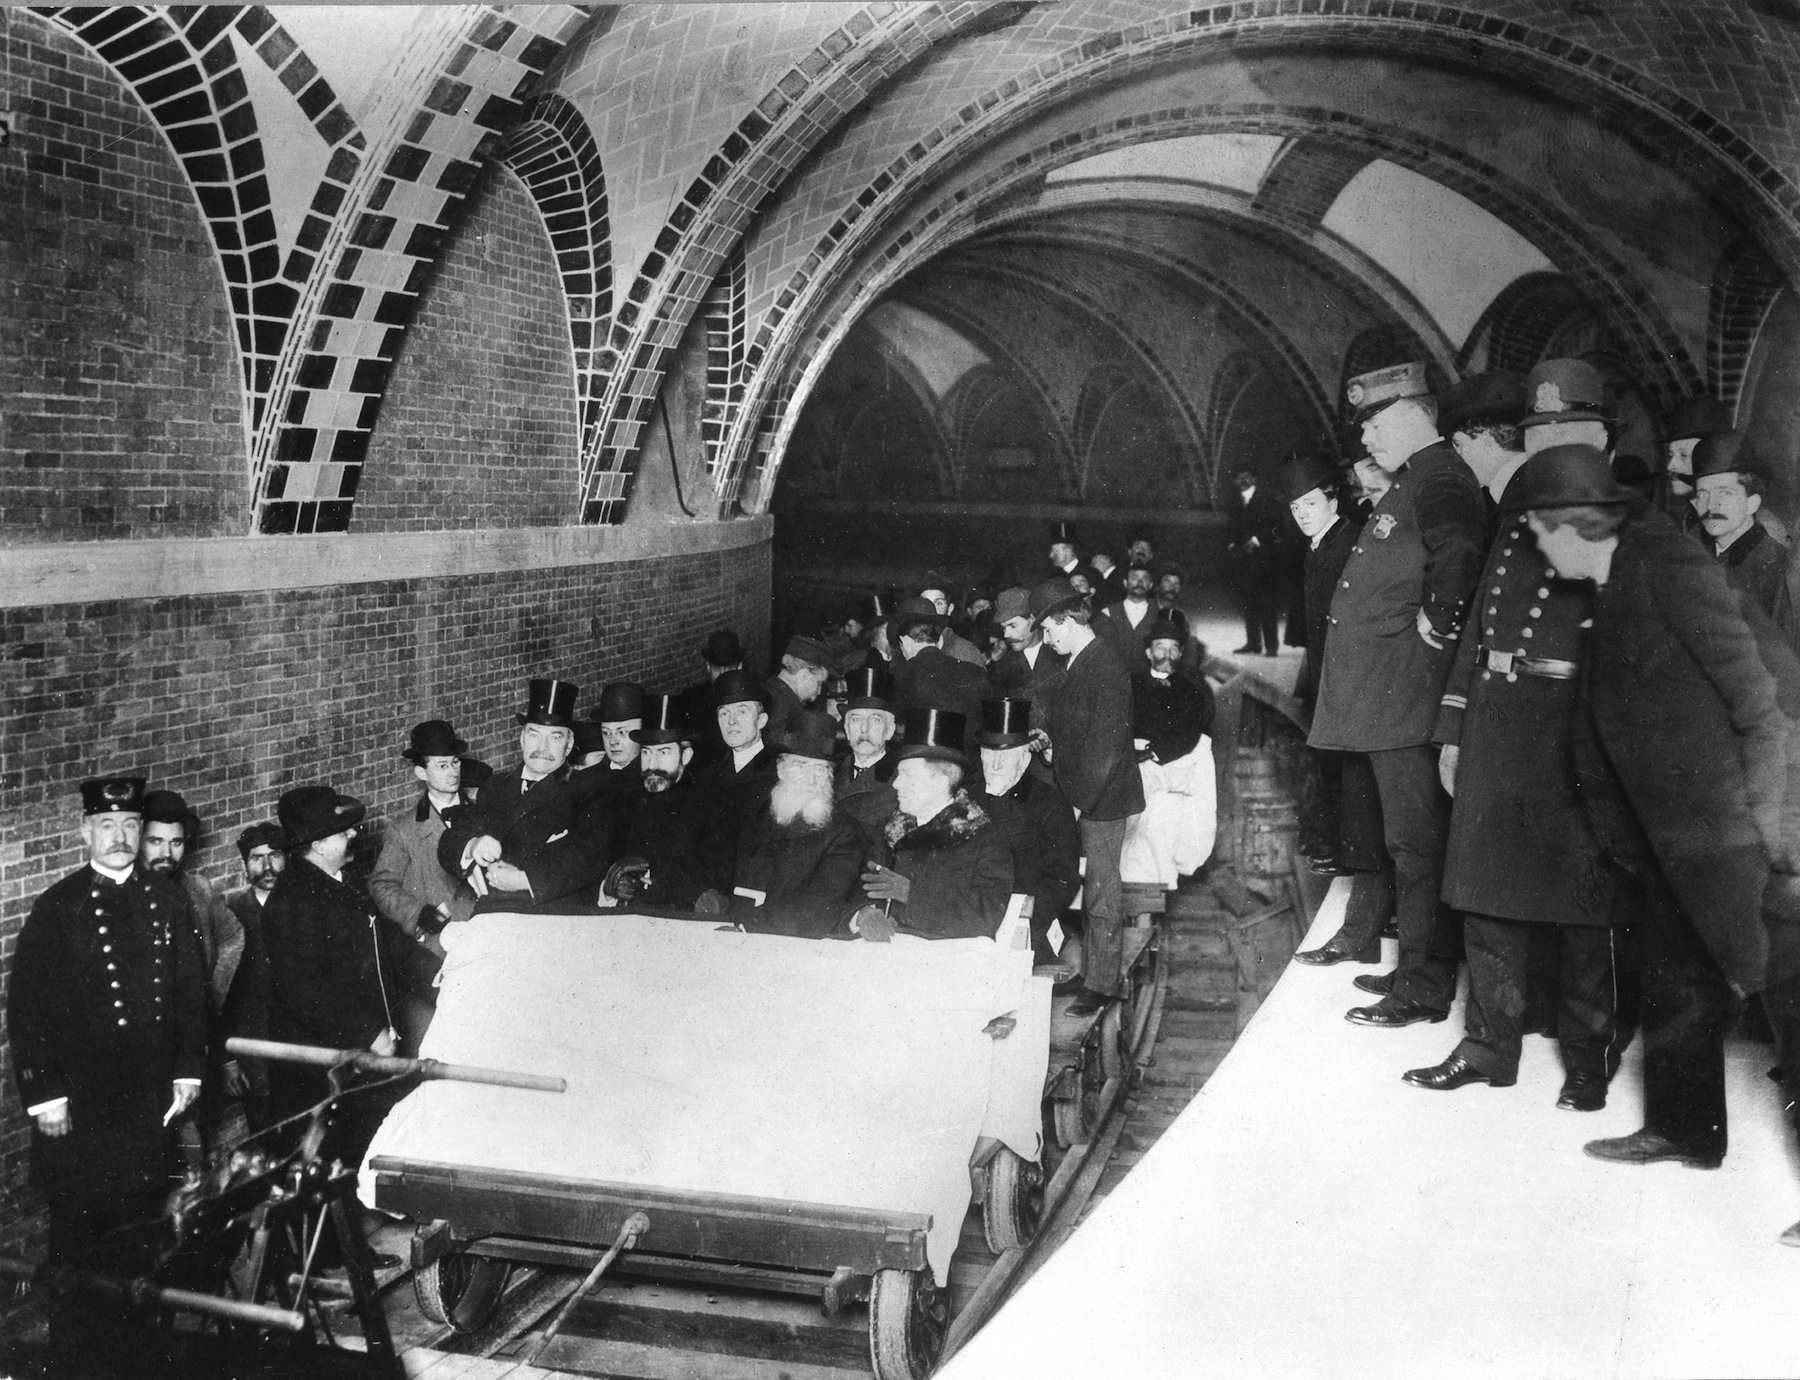 The opening of the first subway in New York, Oct. 27, 1904. (PhotoQuest / Getty Images)